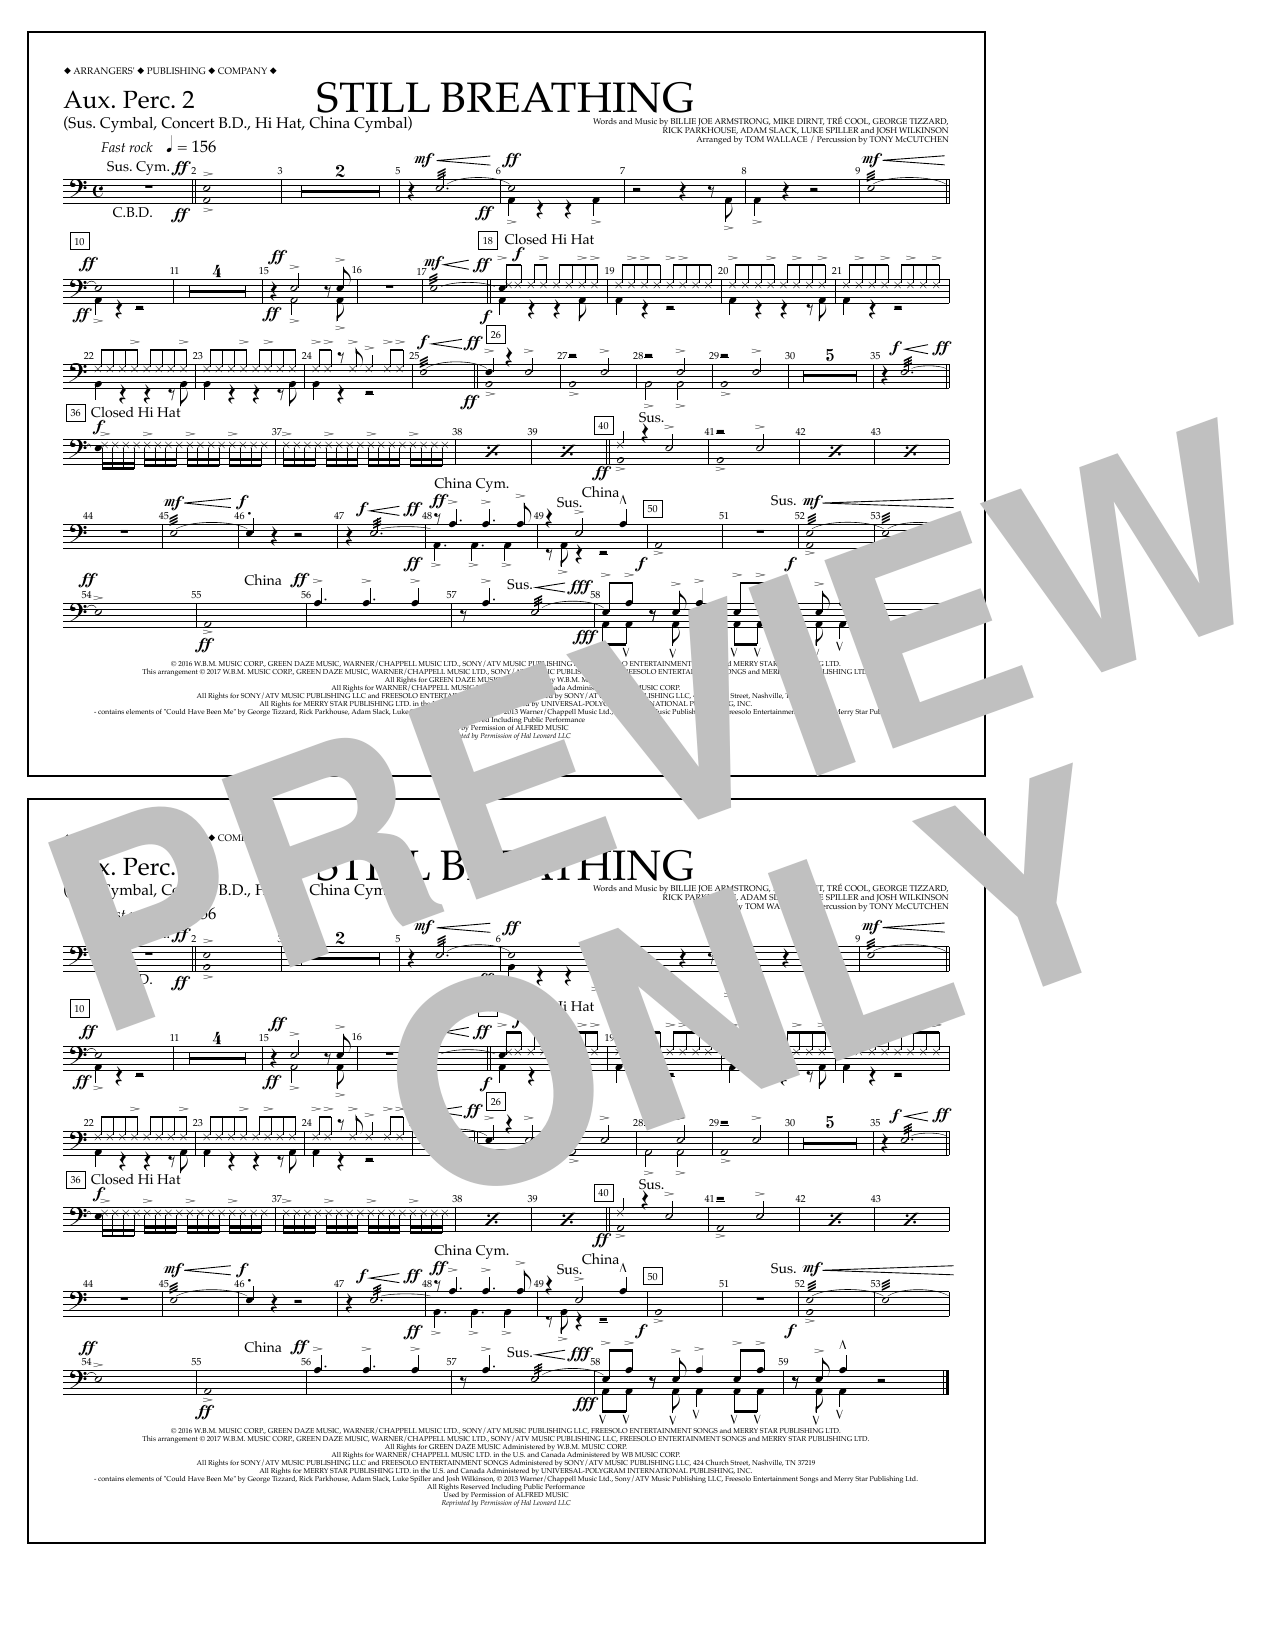 Download Tom Wallace Still Breathing - Aux. Perc. 2 Sheet Music